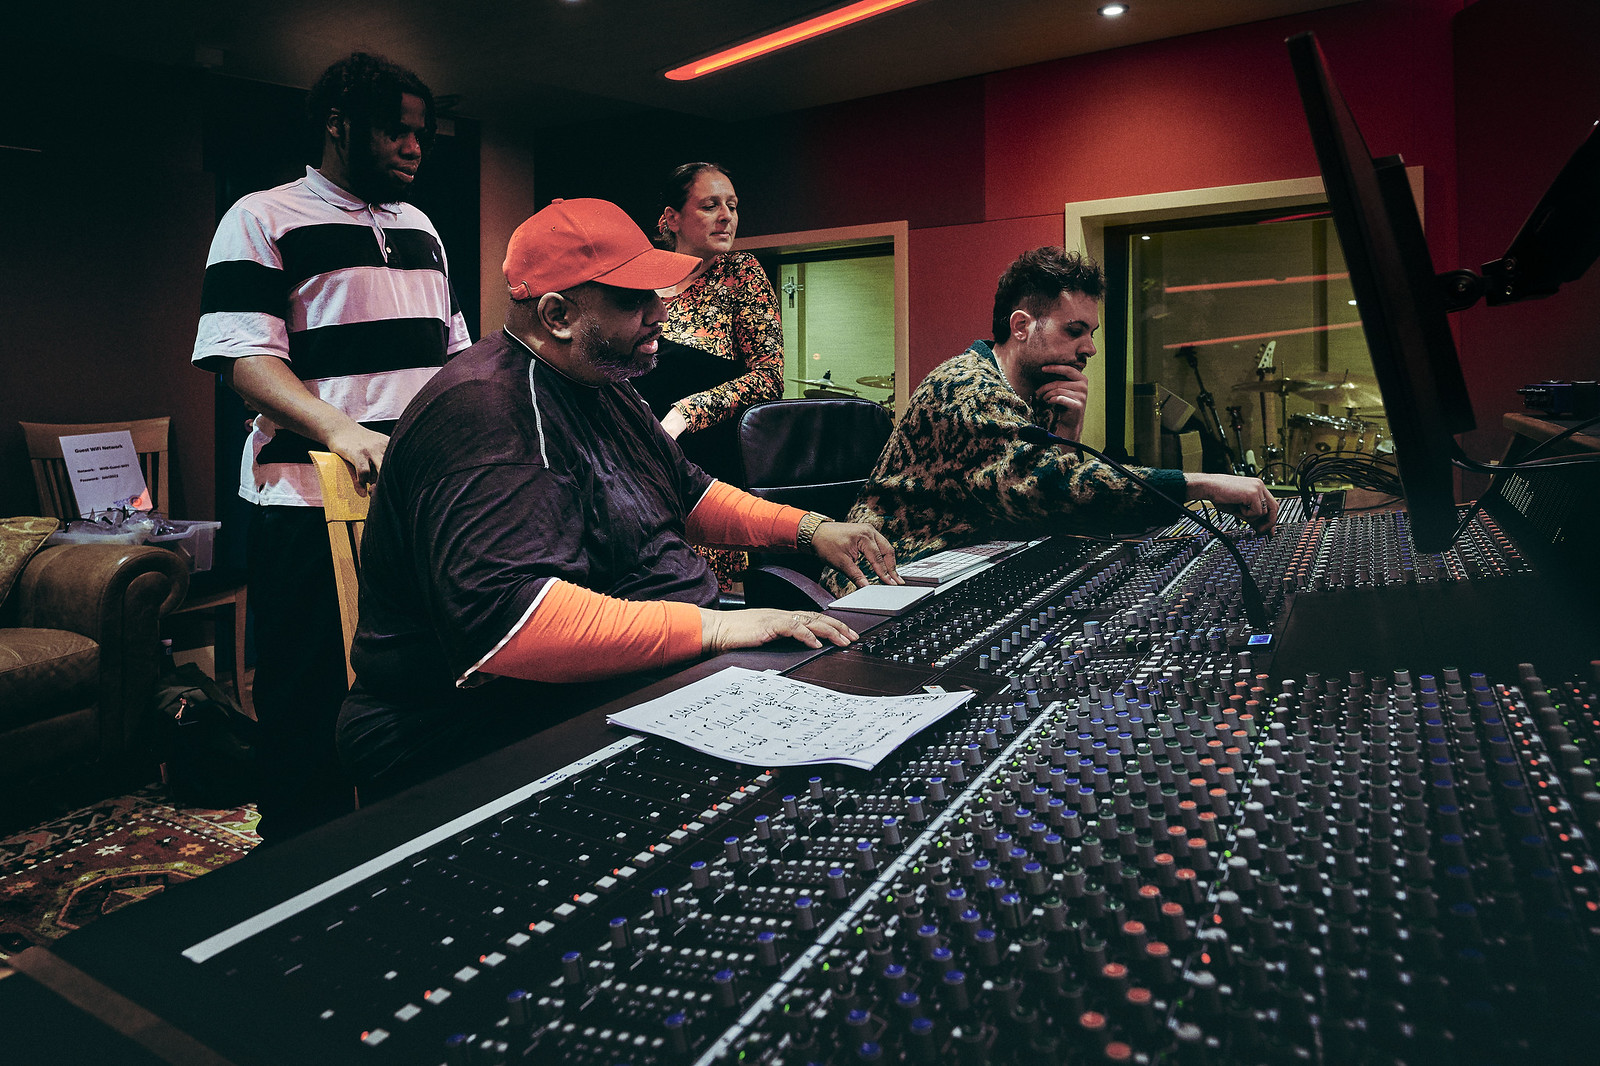 A group of producers working at a sound mixing desk